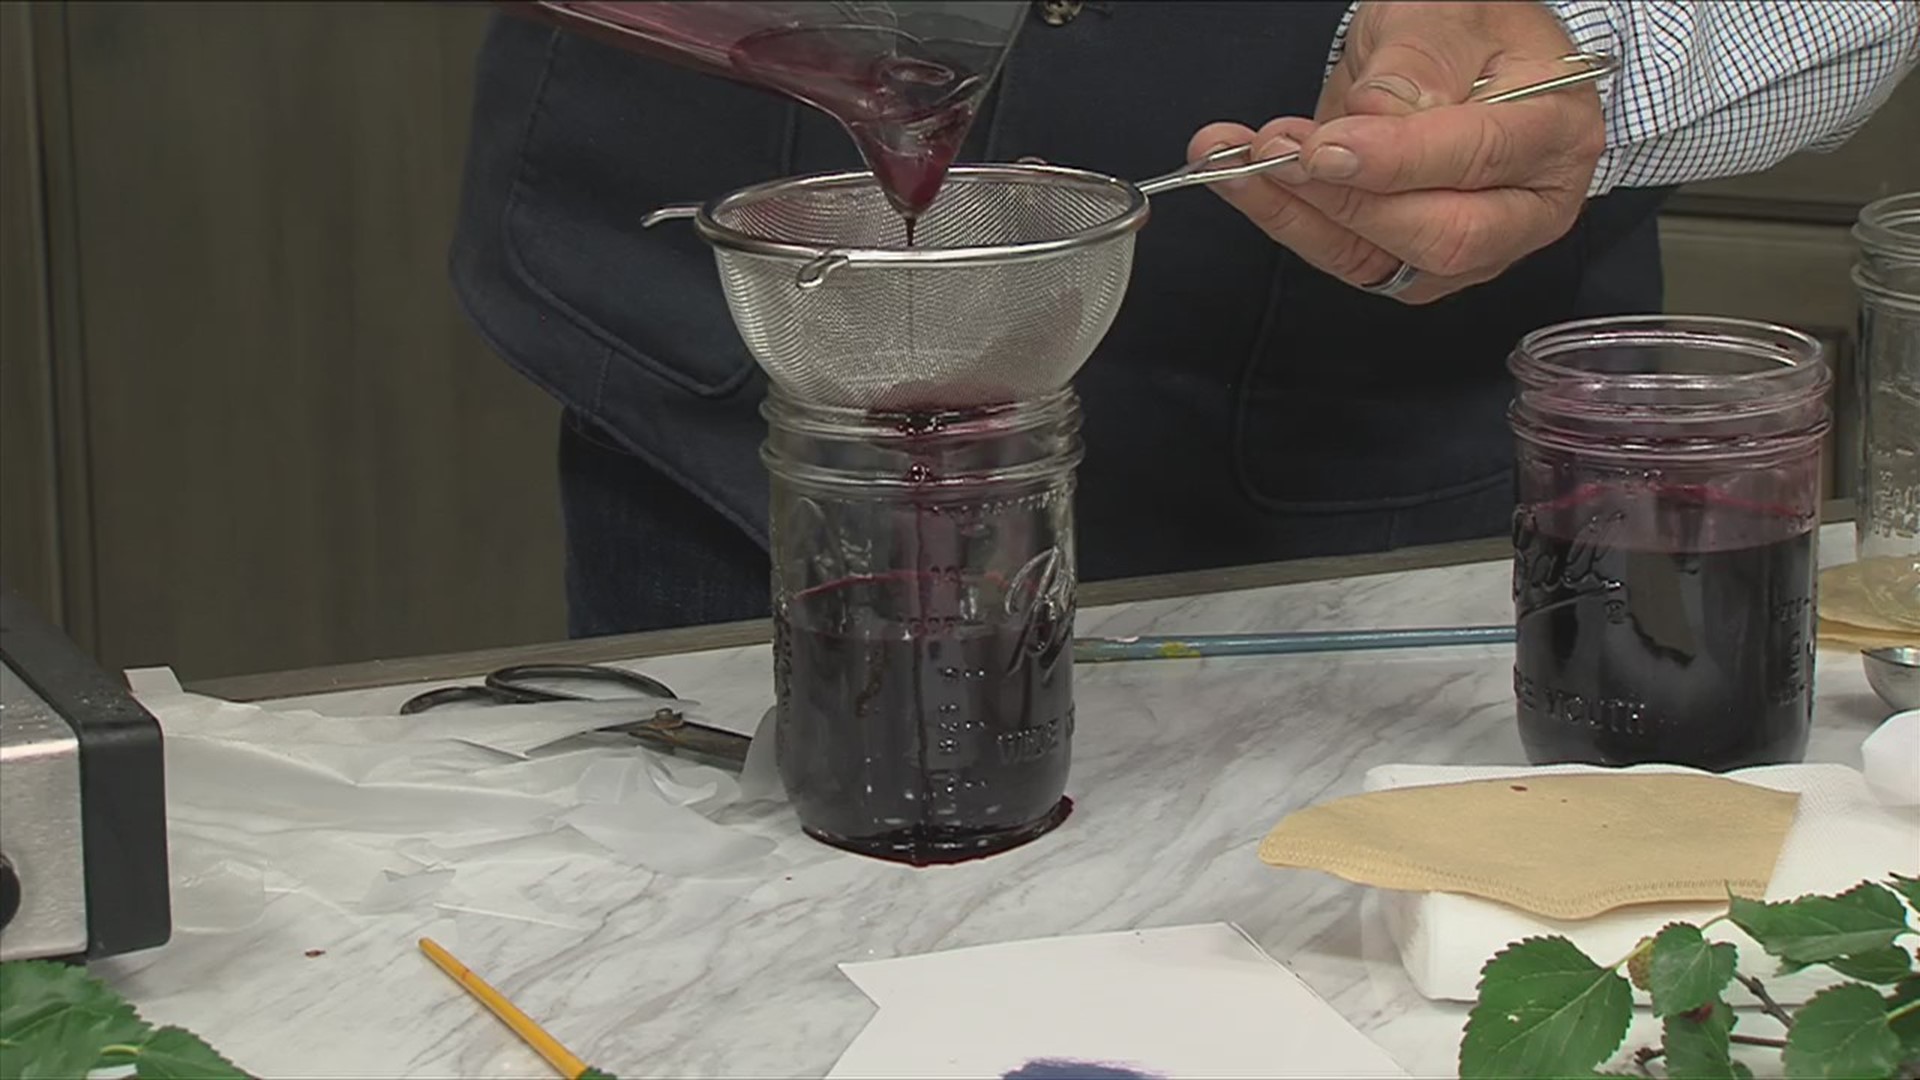 Do It Yourself: Creating ink with berries